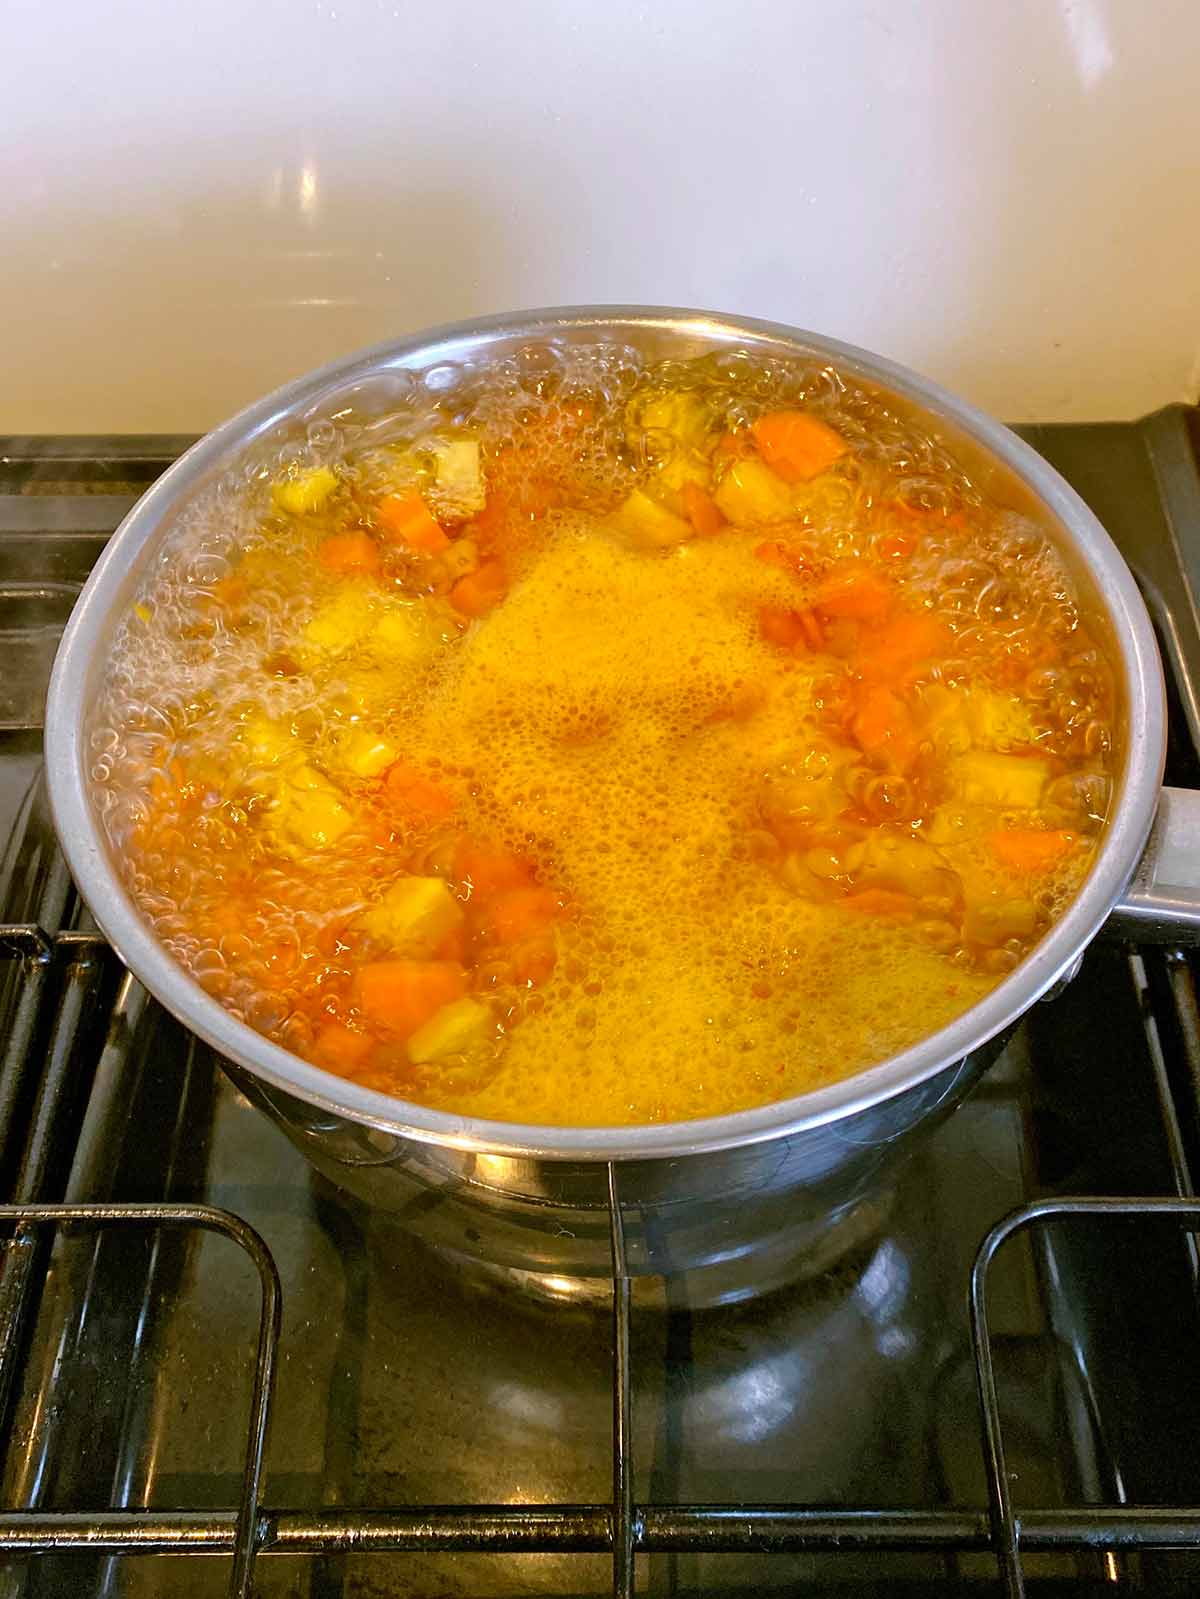 Chopped carrot and swede boiling in a pan on a hob.